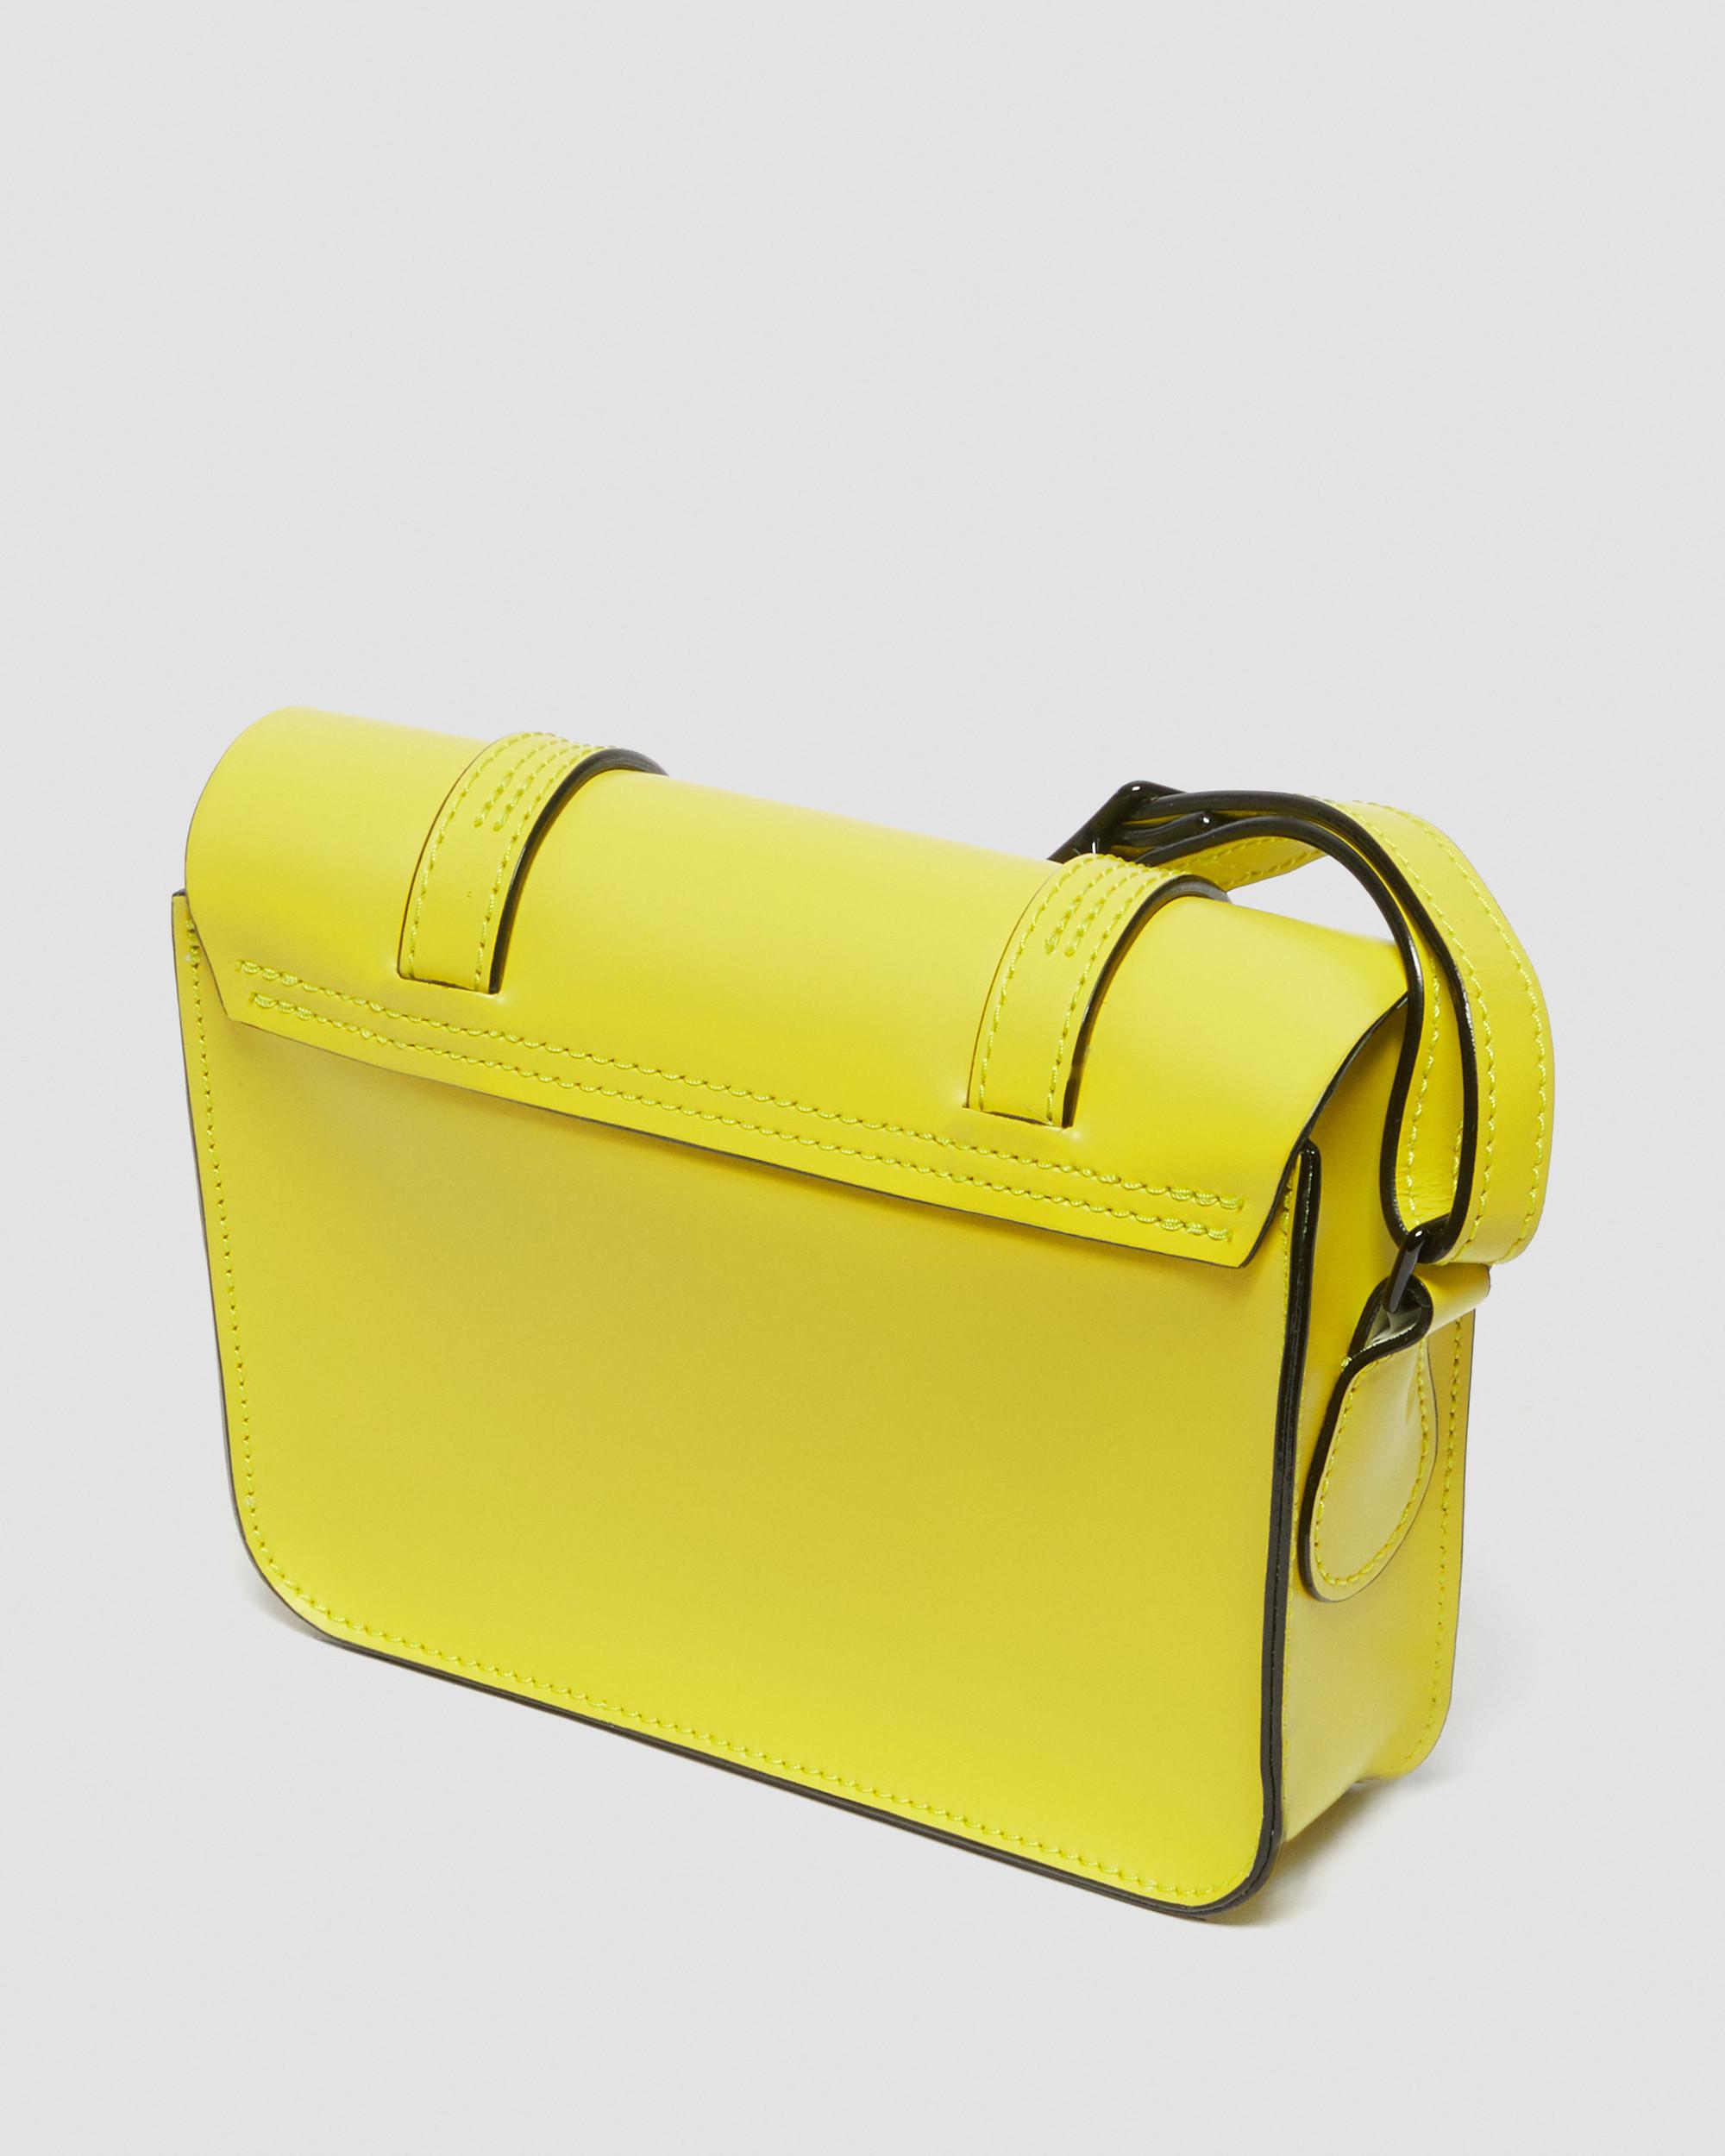 Dr. Martens purse/wallet in black and yellow